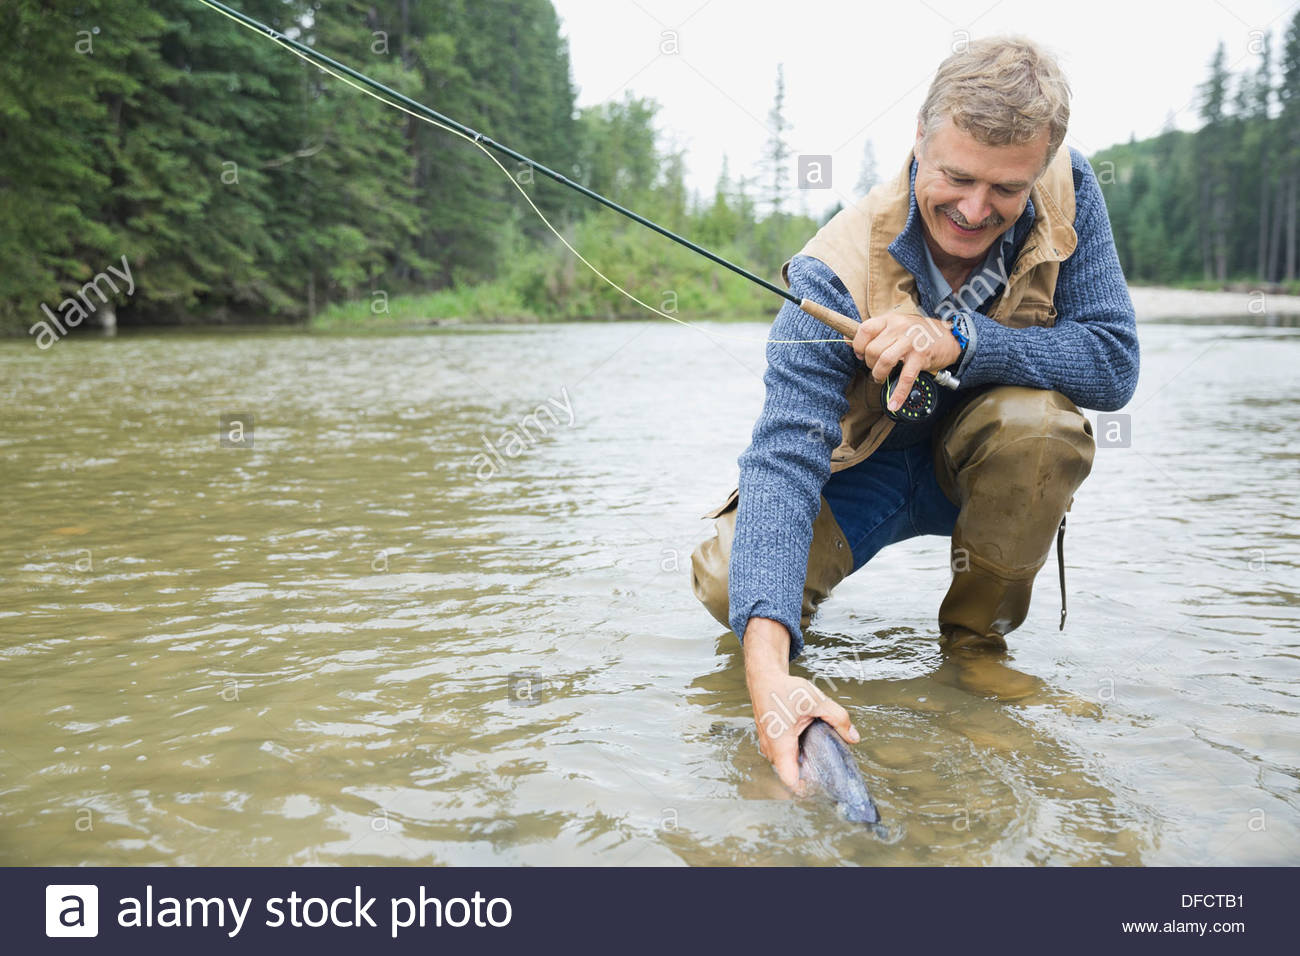 Mature man releasing fish back into river Stock Photo